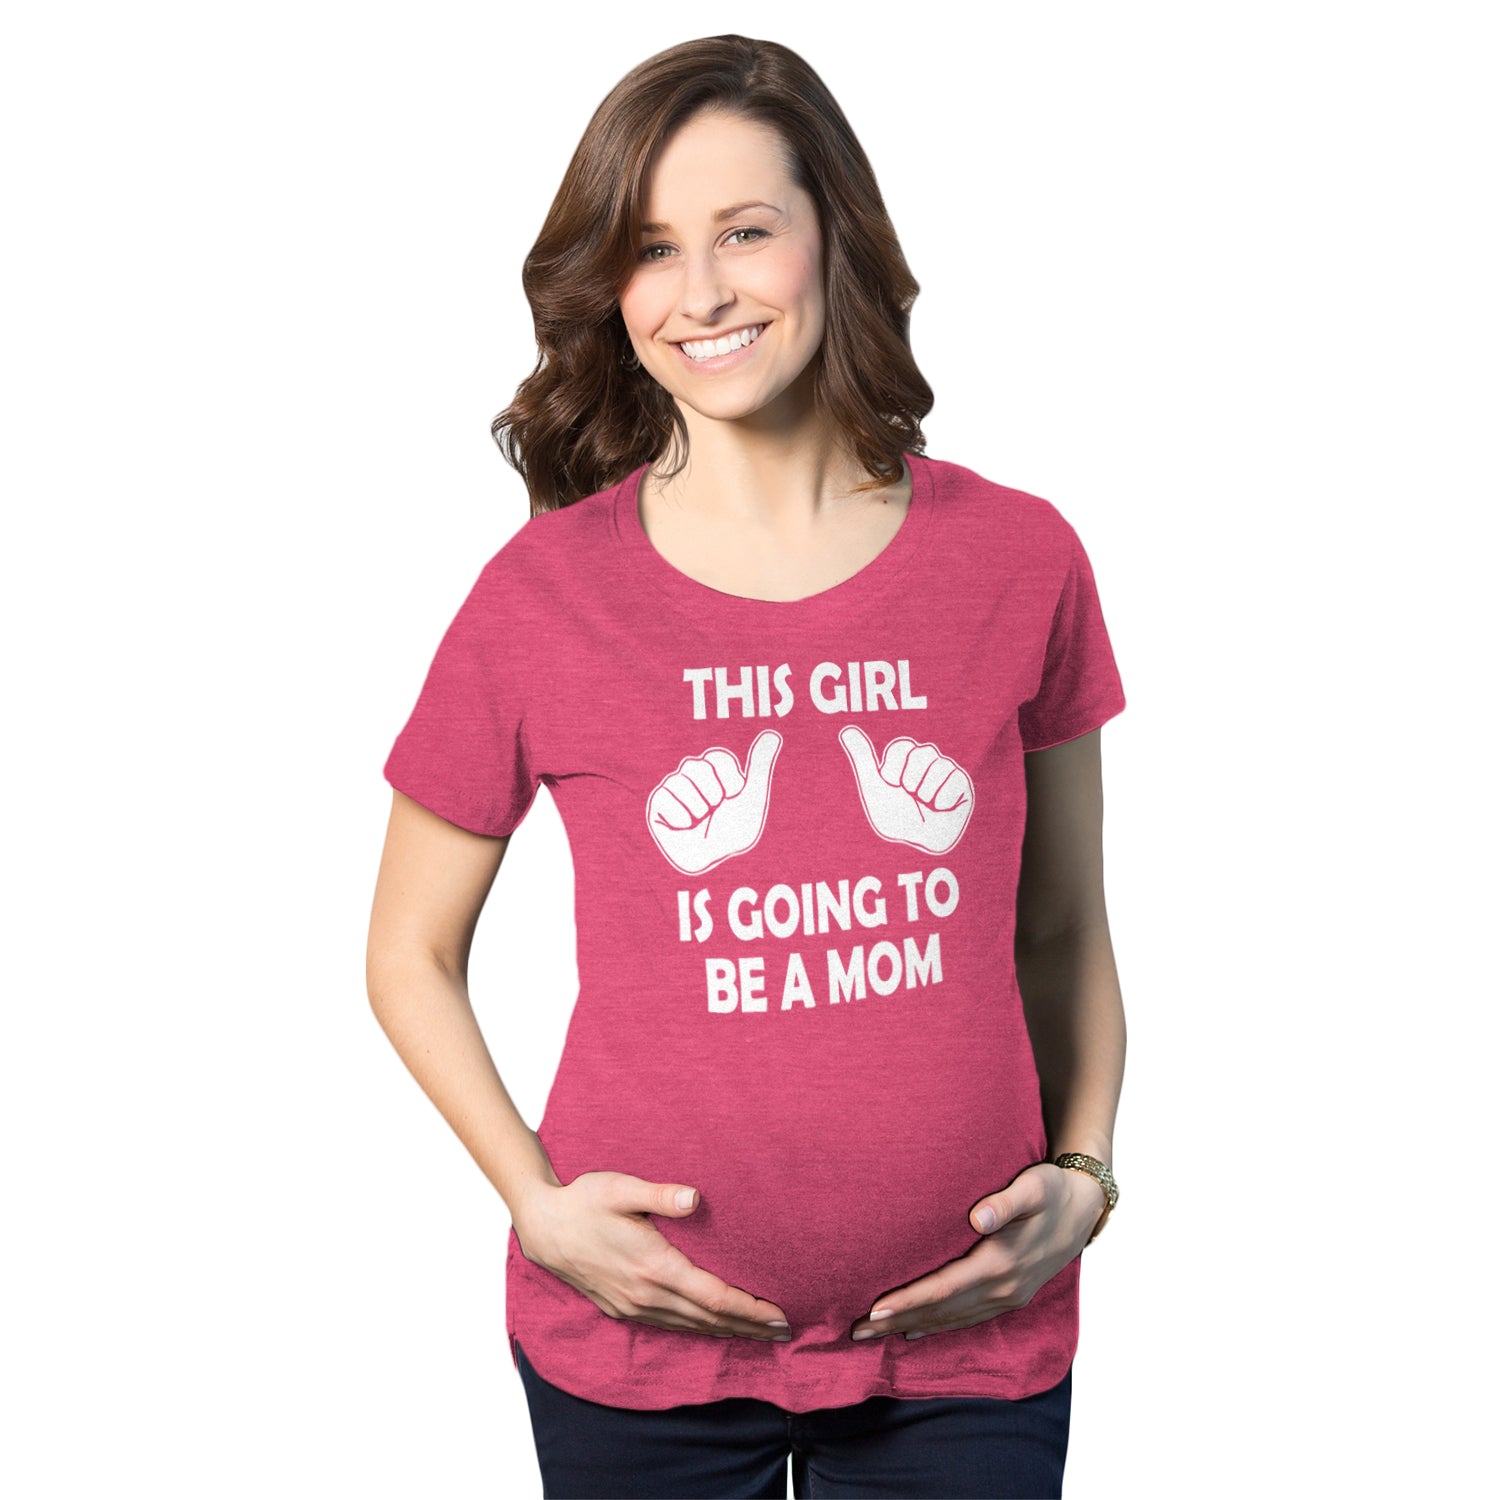 Funny Pink This Girl Is Going To Be A Mom Maternity T Shirt Nerdy Mother's Day Tee